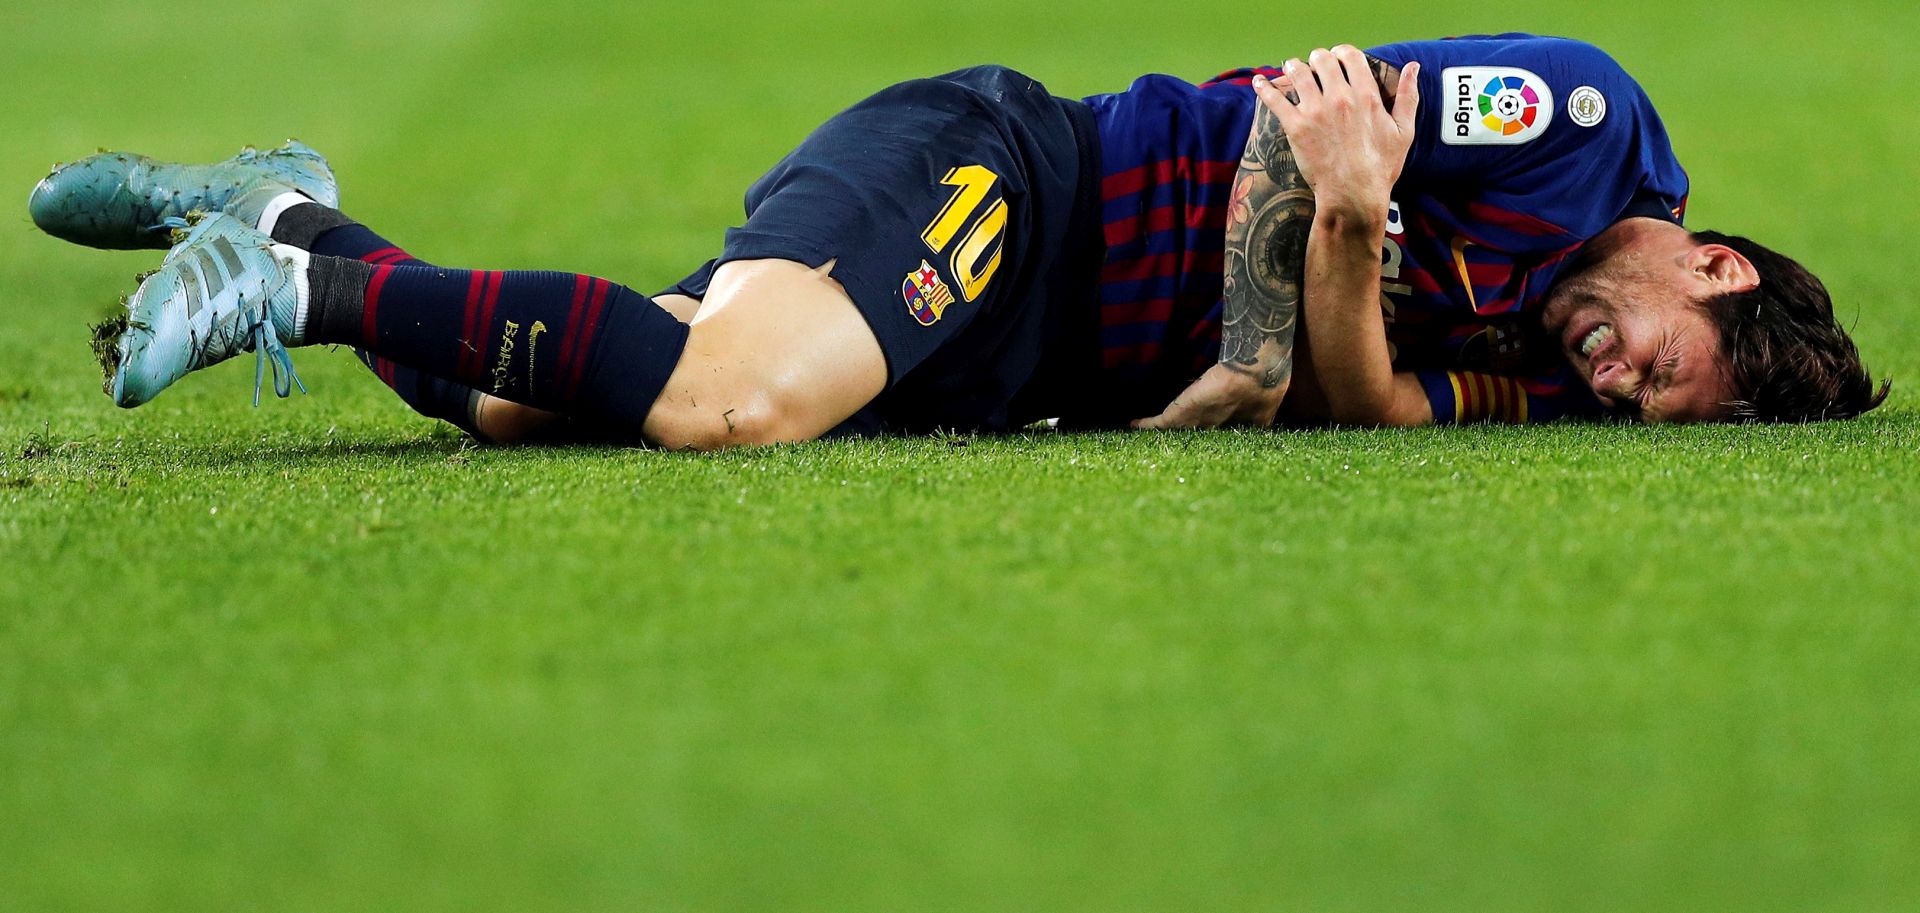 epa07108058 FC Barcelona's Lionel Messi lies on the pitch after sustaining an injury during the Spanish La Liga soccer match between FC Barcelona and Sevilla CF at Camp Nou stadium in Barcelona, Spain, 20 October 2018. Messi broke his arm in the match and will miss the Clasico.  EPA/ALEJANDRO GARCIA